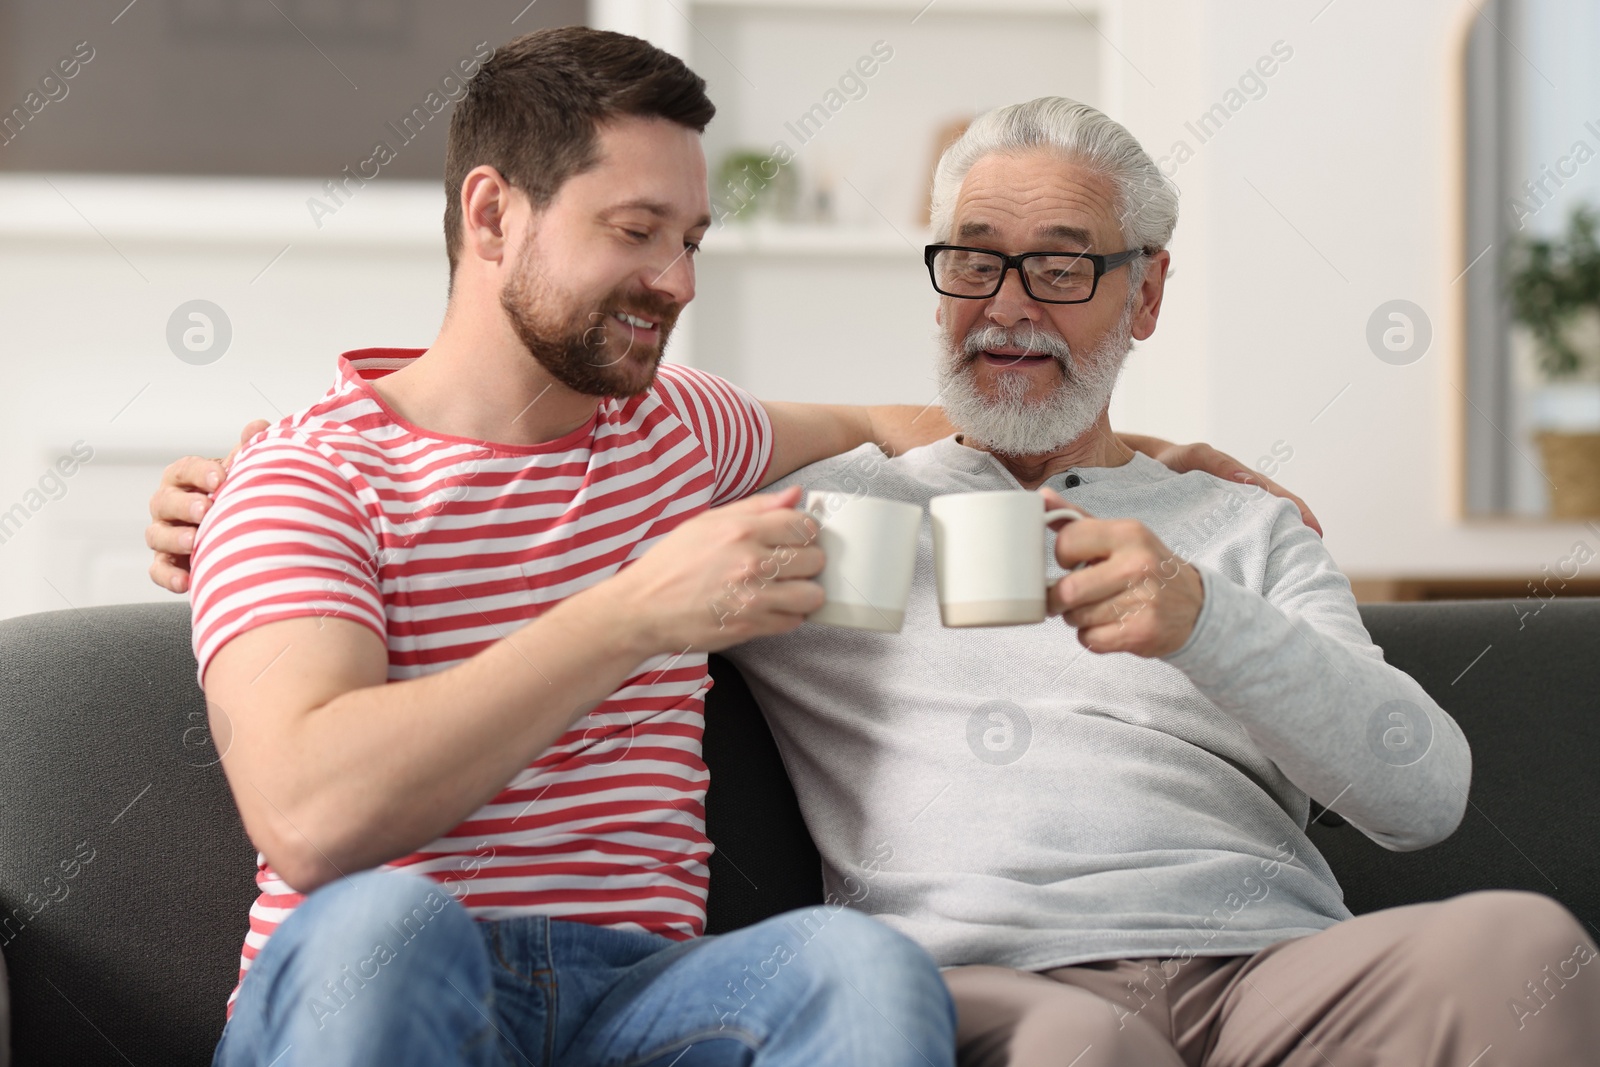 Photo of Happy son and his dad with cups at home